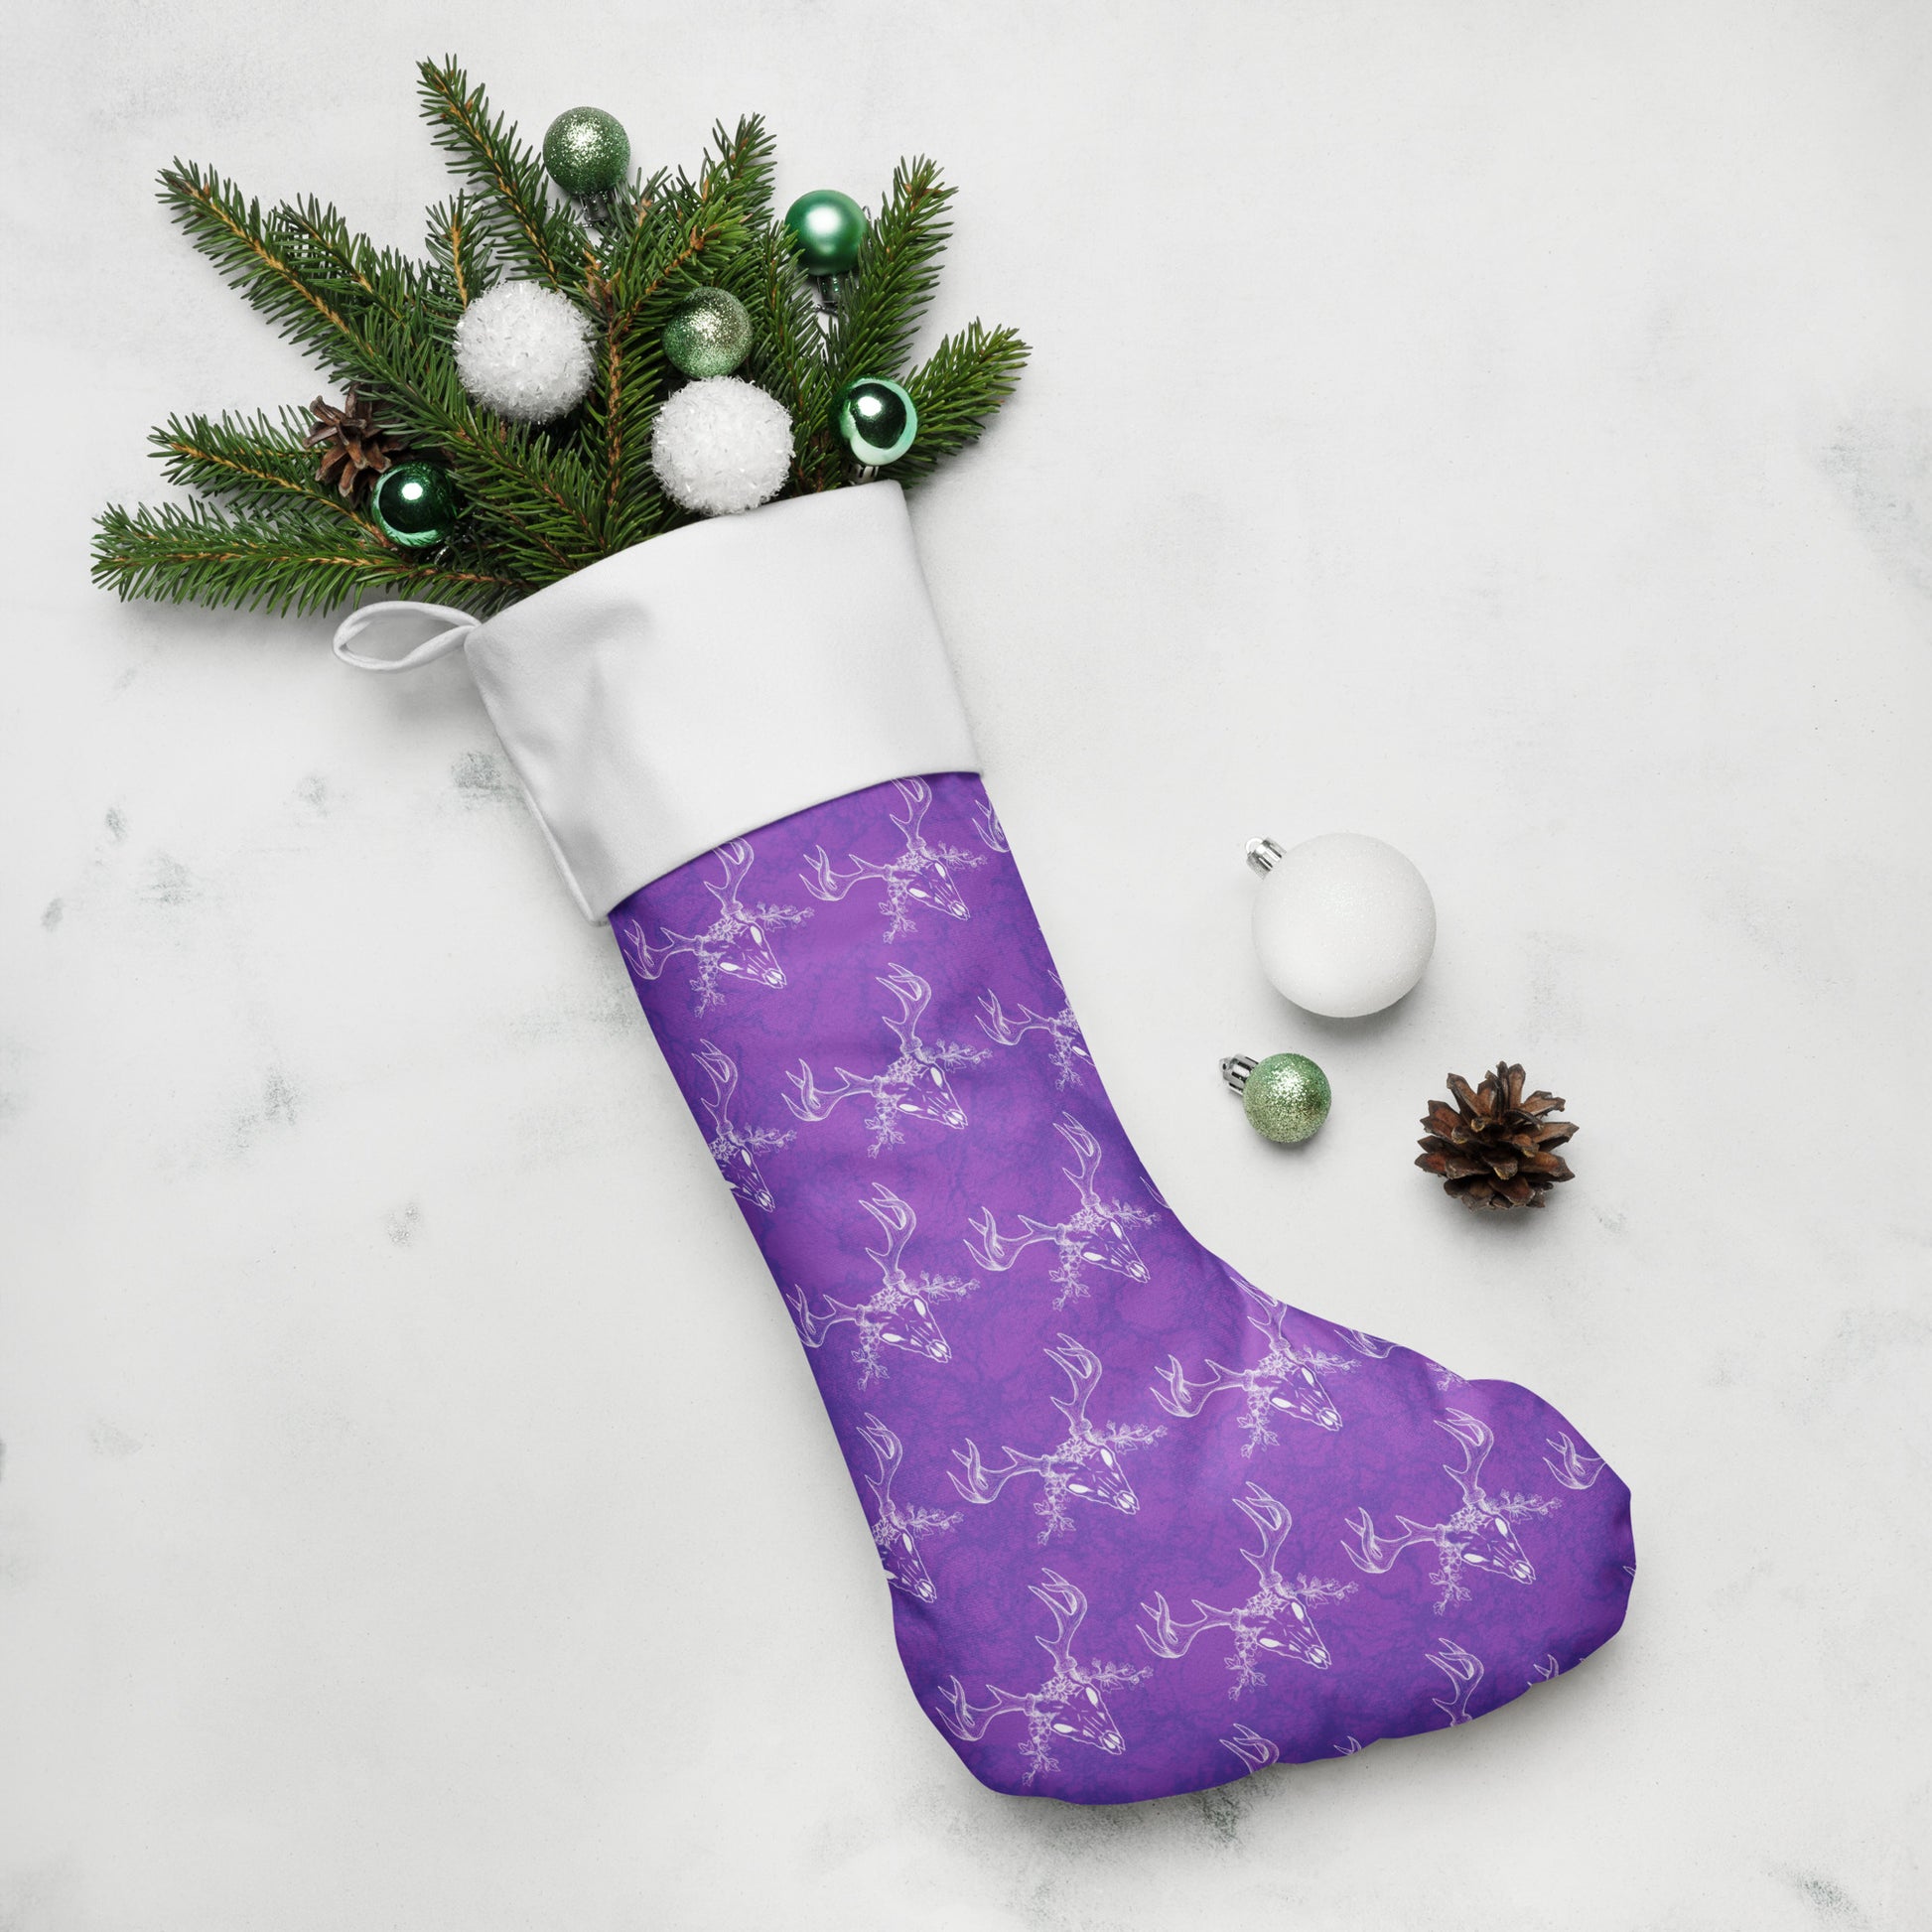 Limited Edition Purple Deer Skull Christmas Stocking.  7 by 18 inches. The front has a hand-illustrated deer skull design on a purple background with an off-white polyester fabric on the back. It has a white fold-over cuff and a loop for hanging. Shown stuffed with pine boughs and ornaments.